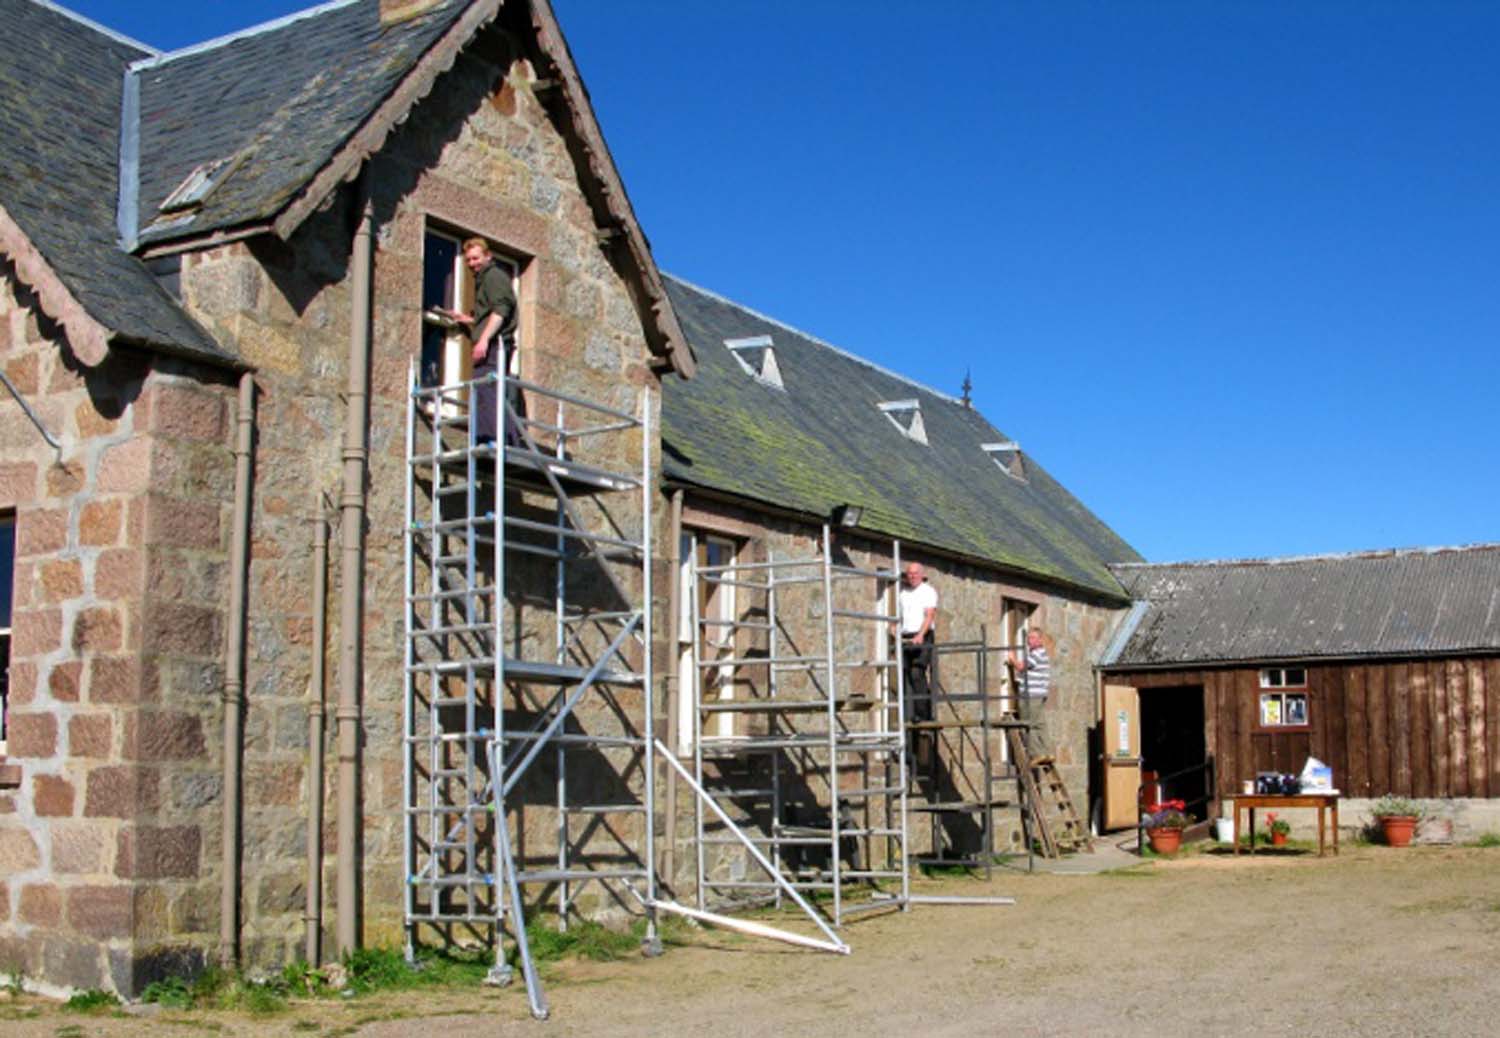 People on scaffolding next to the construction site of the village hall.